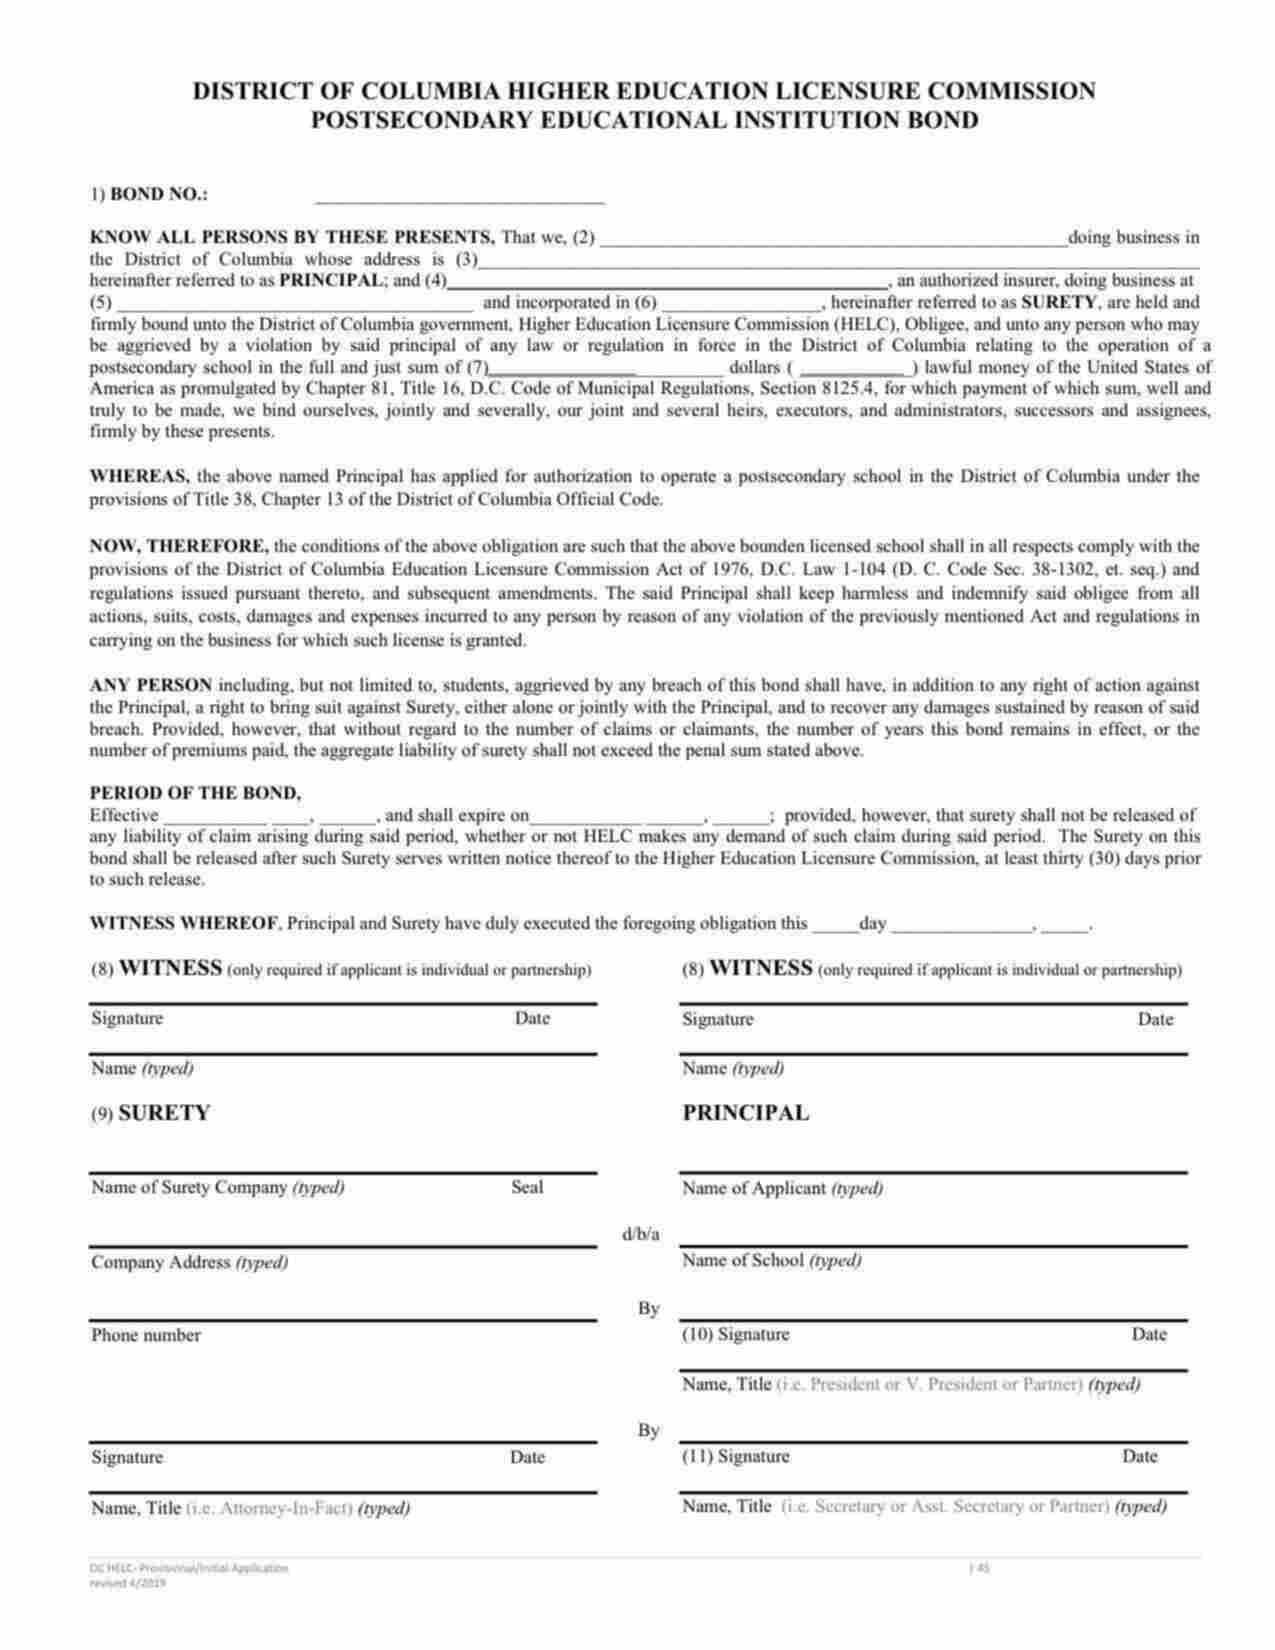 District of Columbia Postsecondary Educational Institution Bond Form